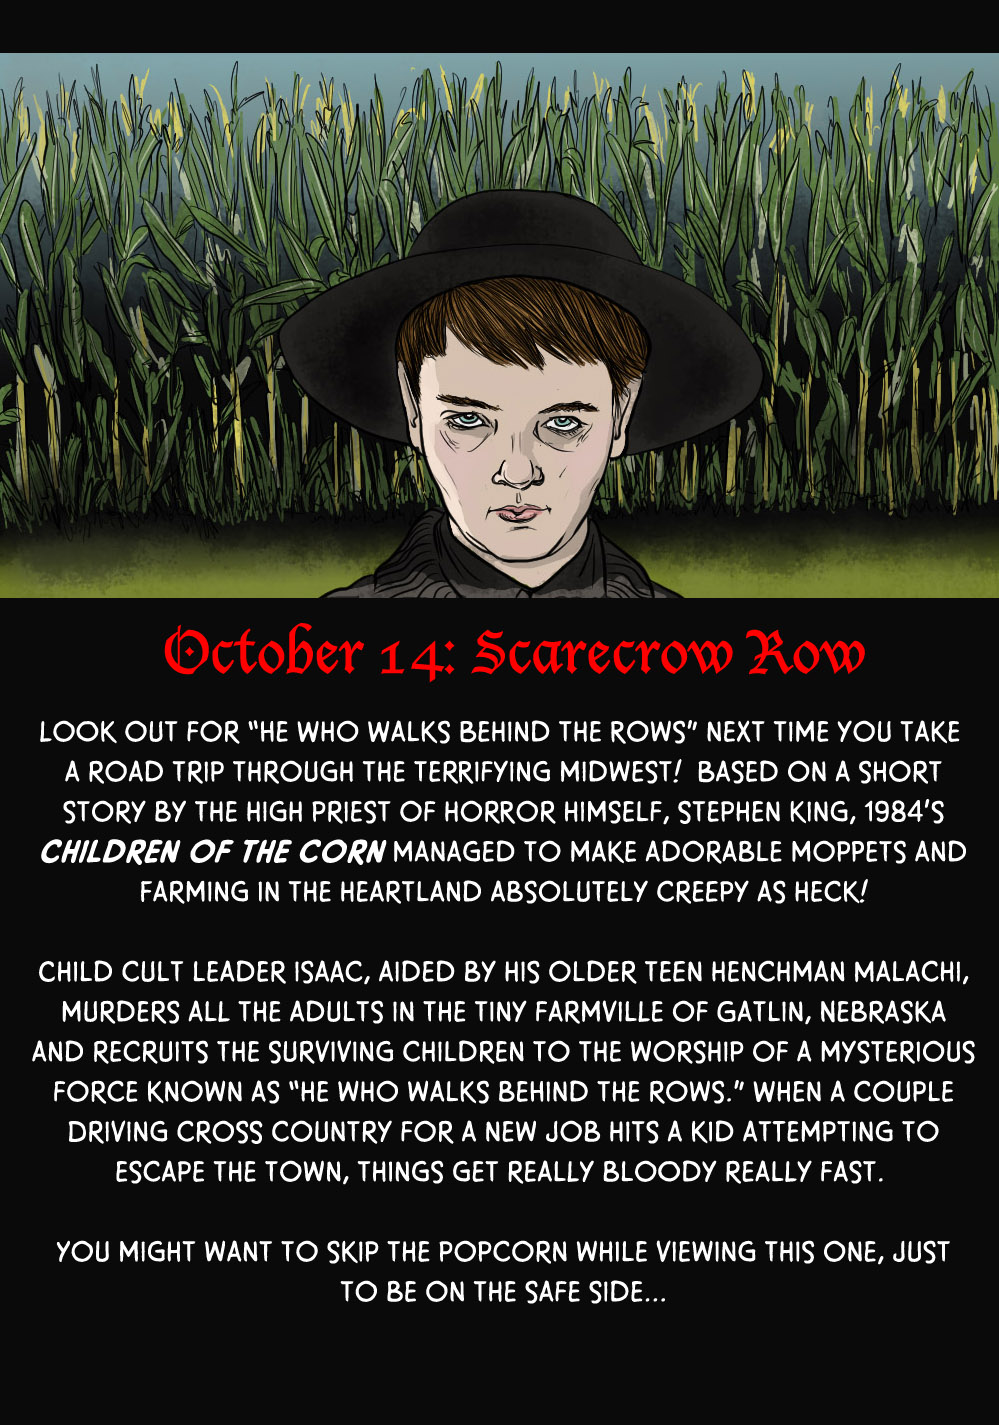 October 14: Scarecrow (He Who Walks Behind The) Row